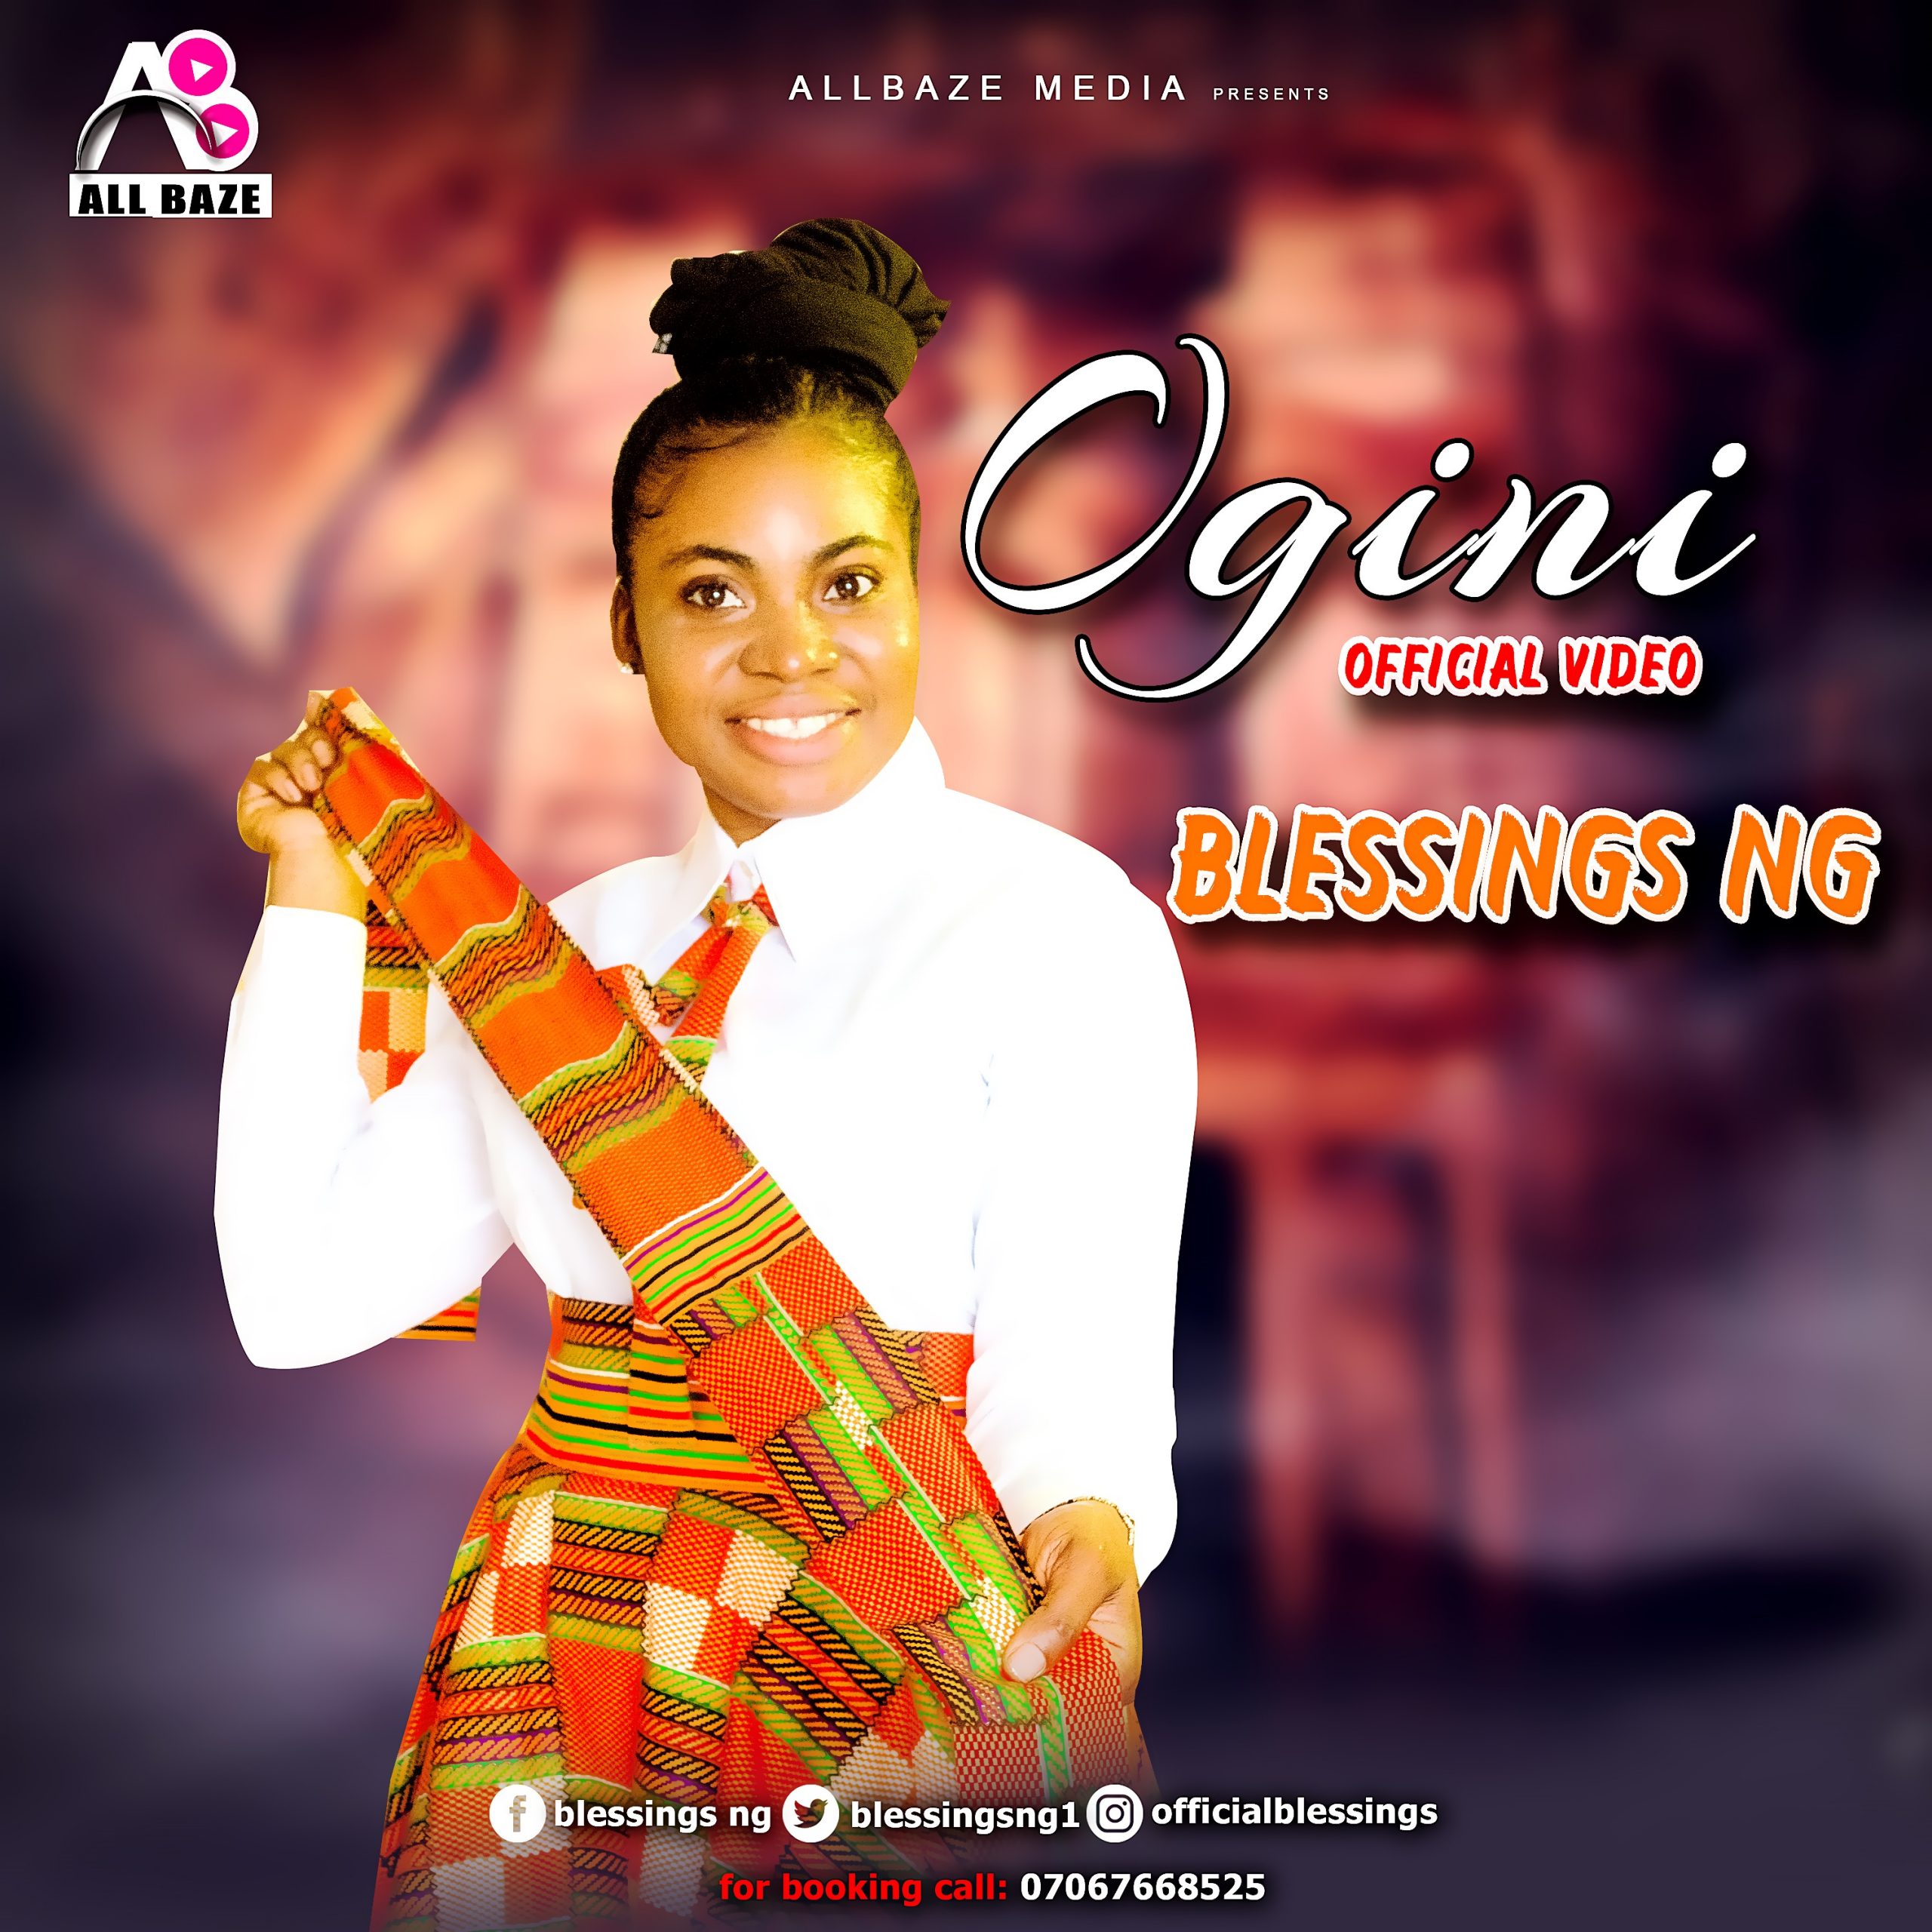 Download Blessings Ng Ogini Video